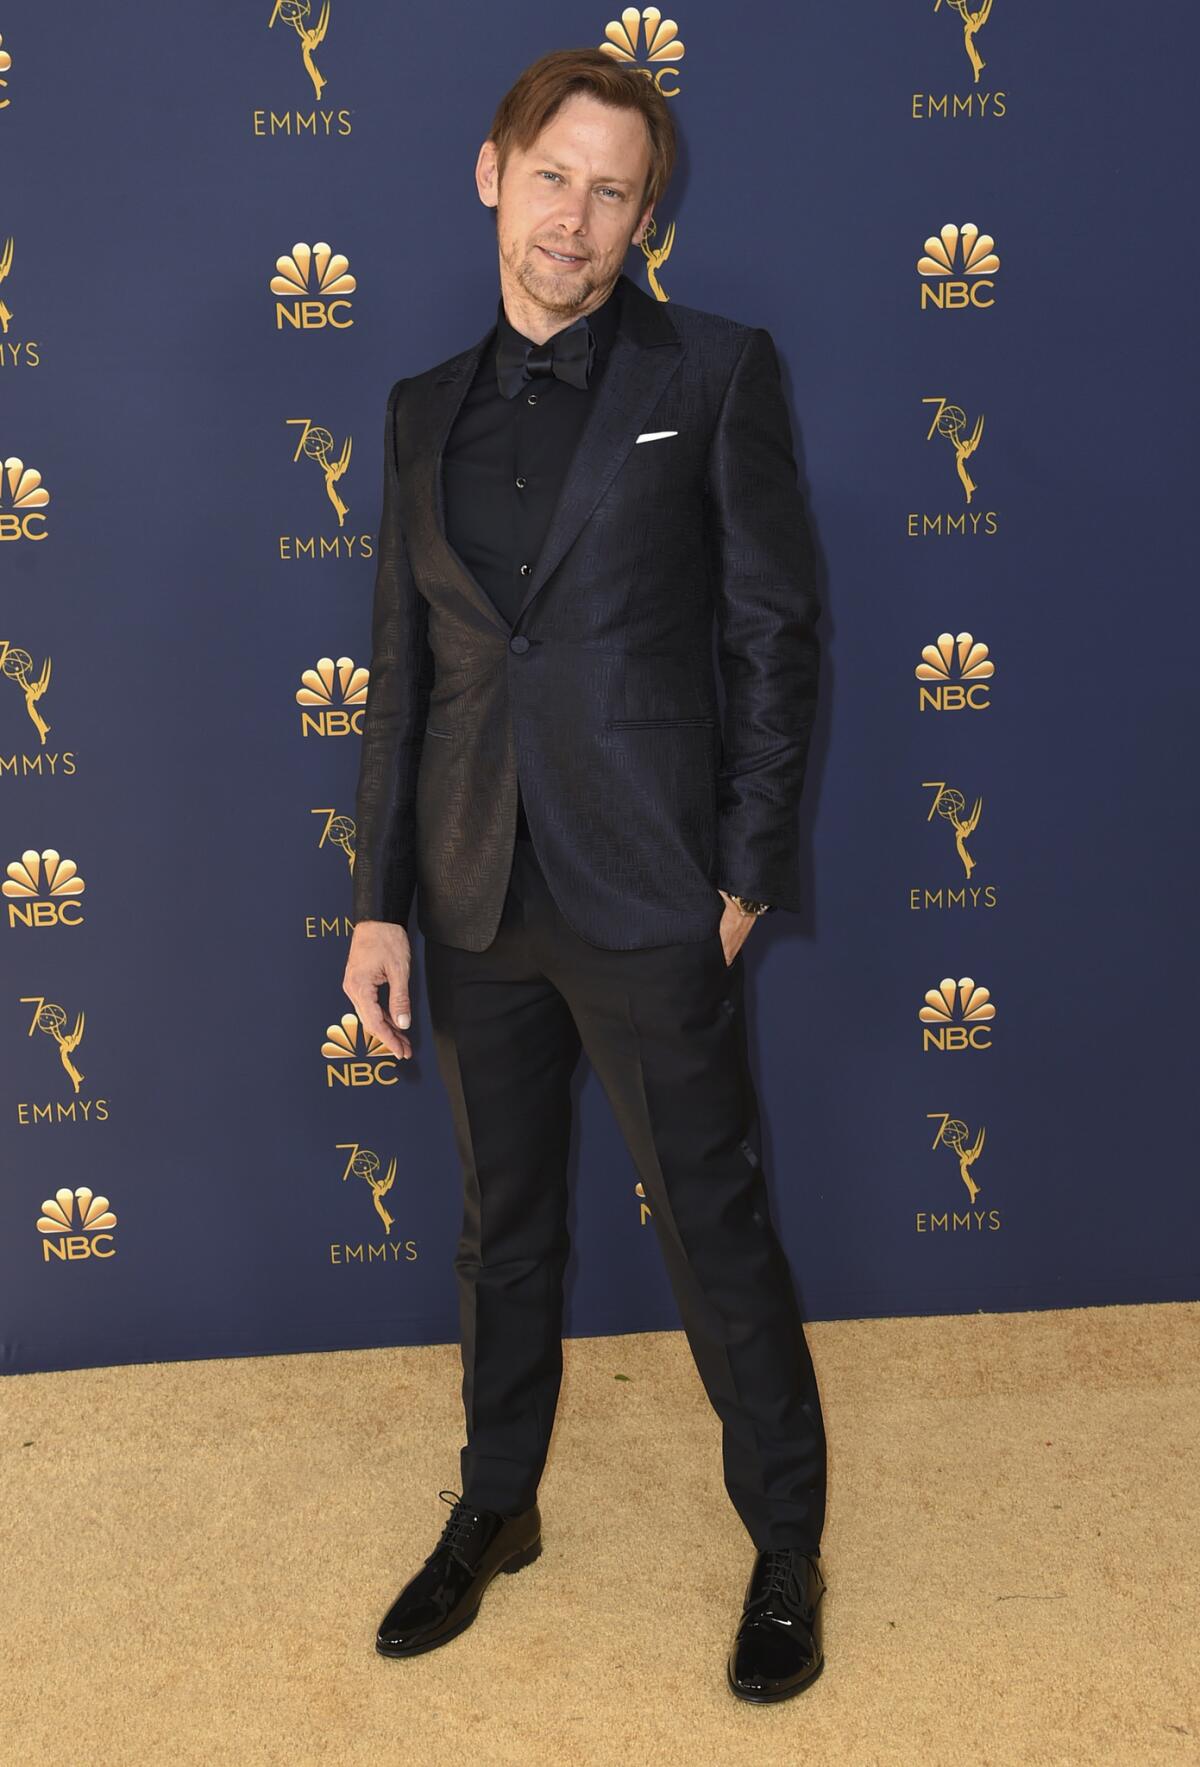 Jimmi Simpson arrives at the 70th Primetime Emmy Awards.